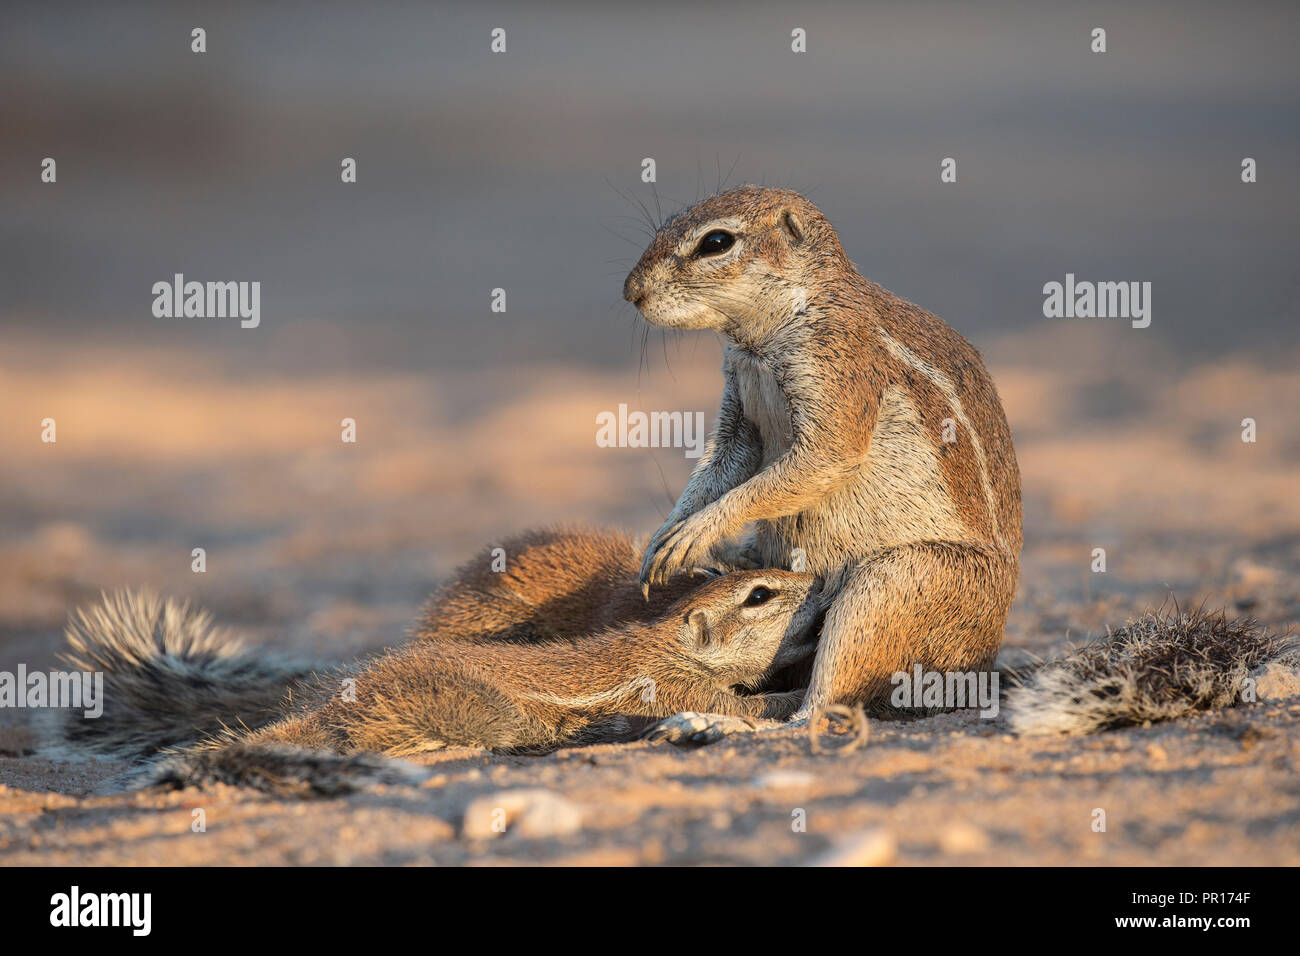 Ground squirrels (Xerus inauris) suckling, Kgalagadi Transfrontier Park, Northern Cape, South Africa, Africa Stock Photo